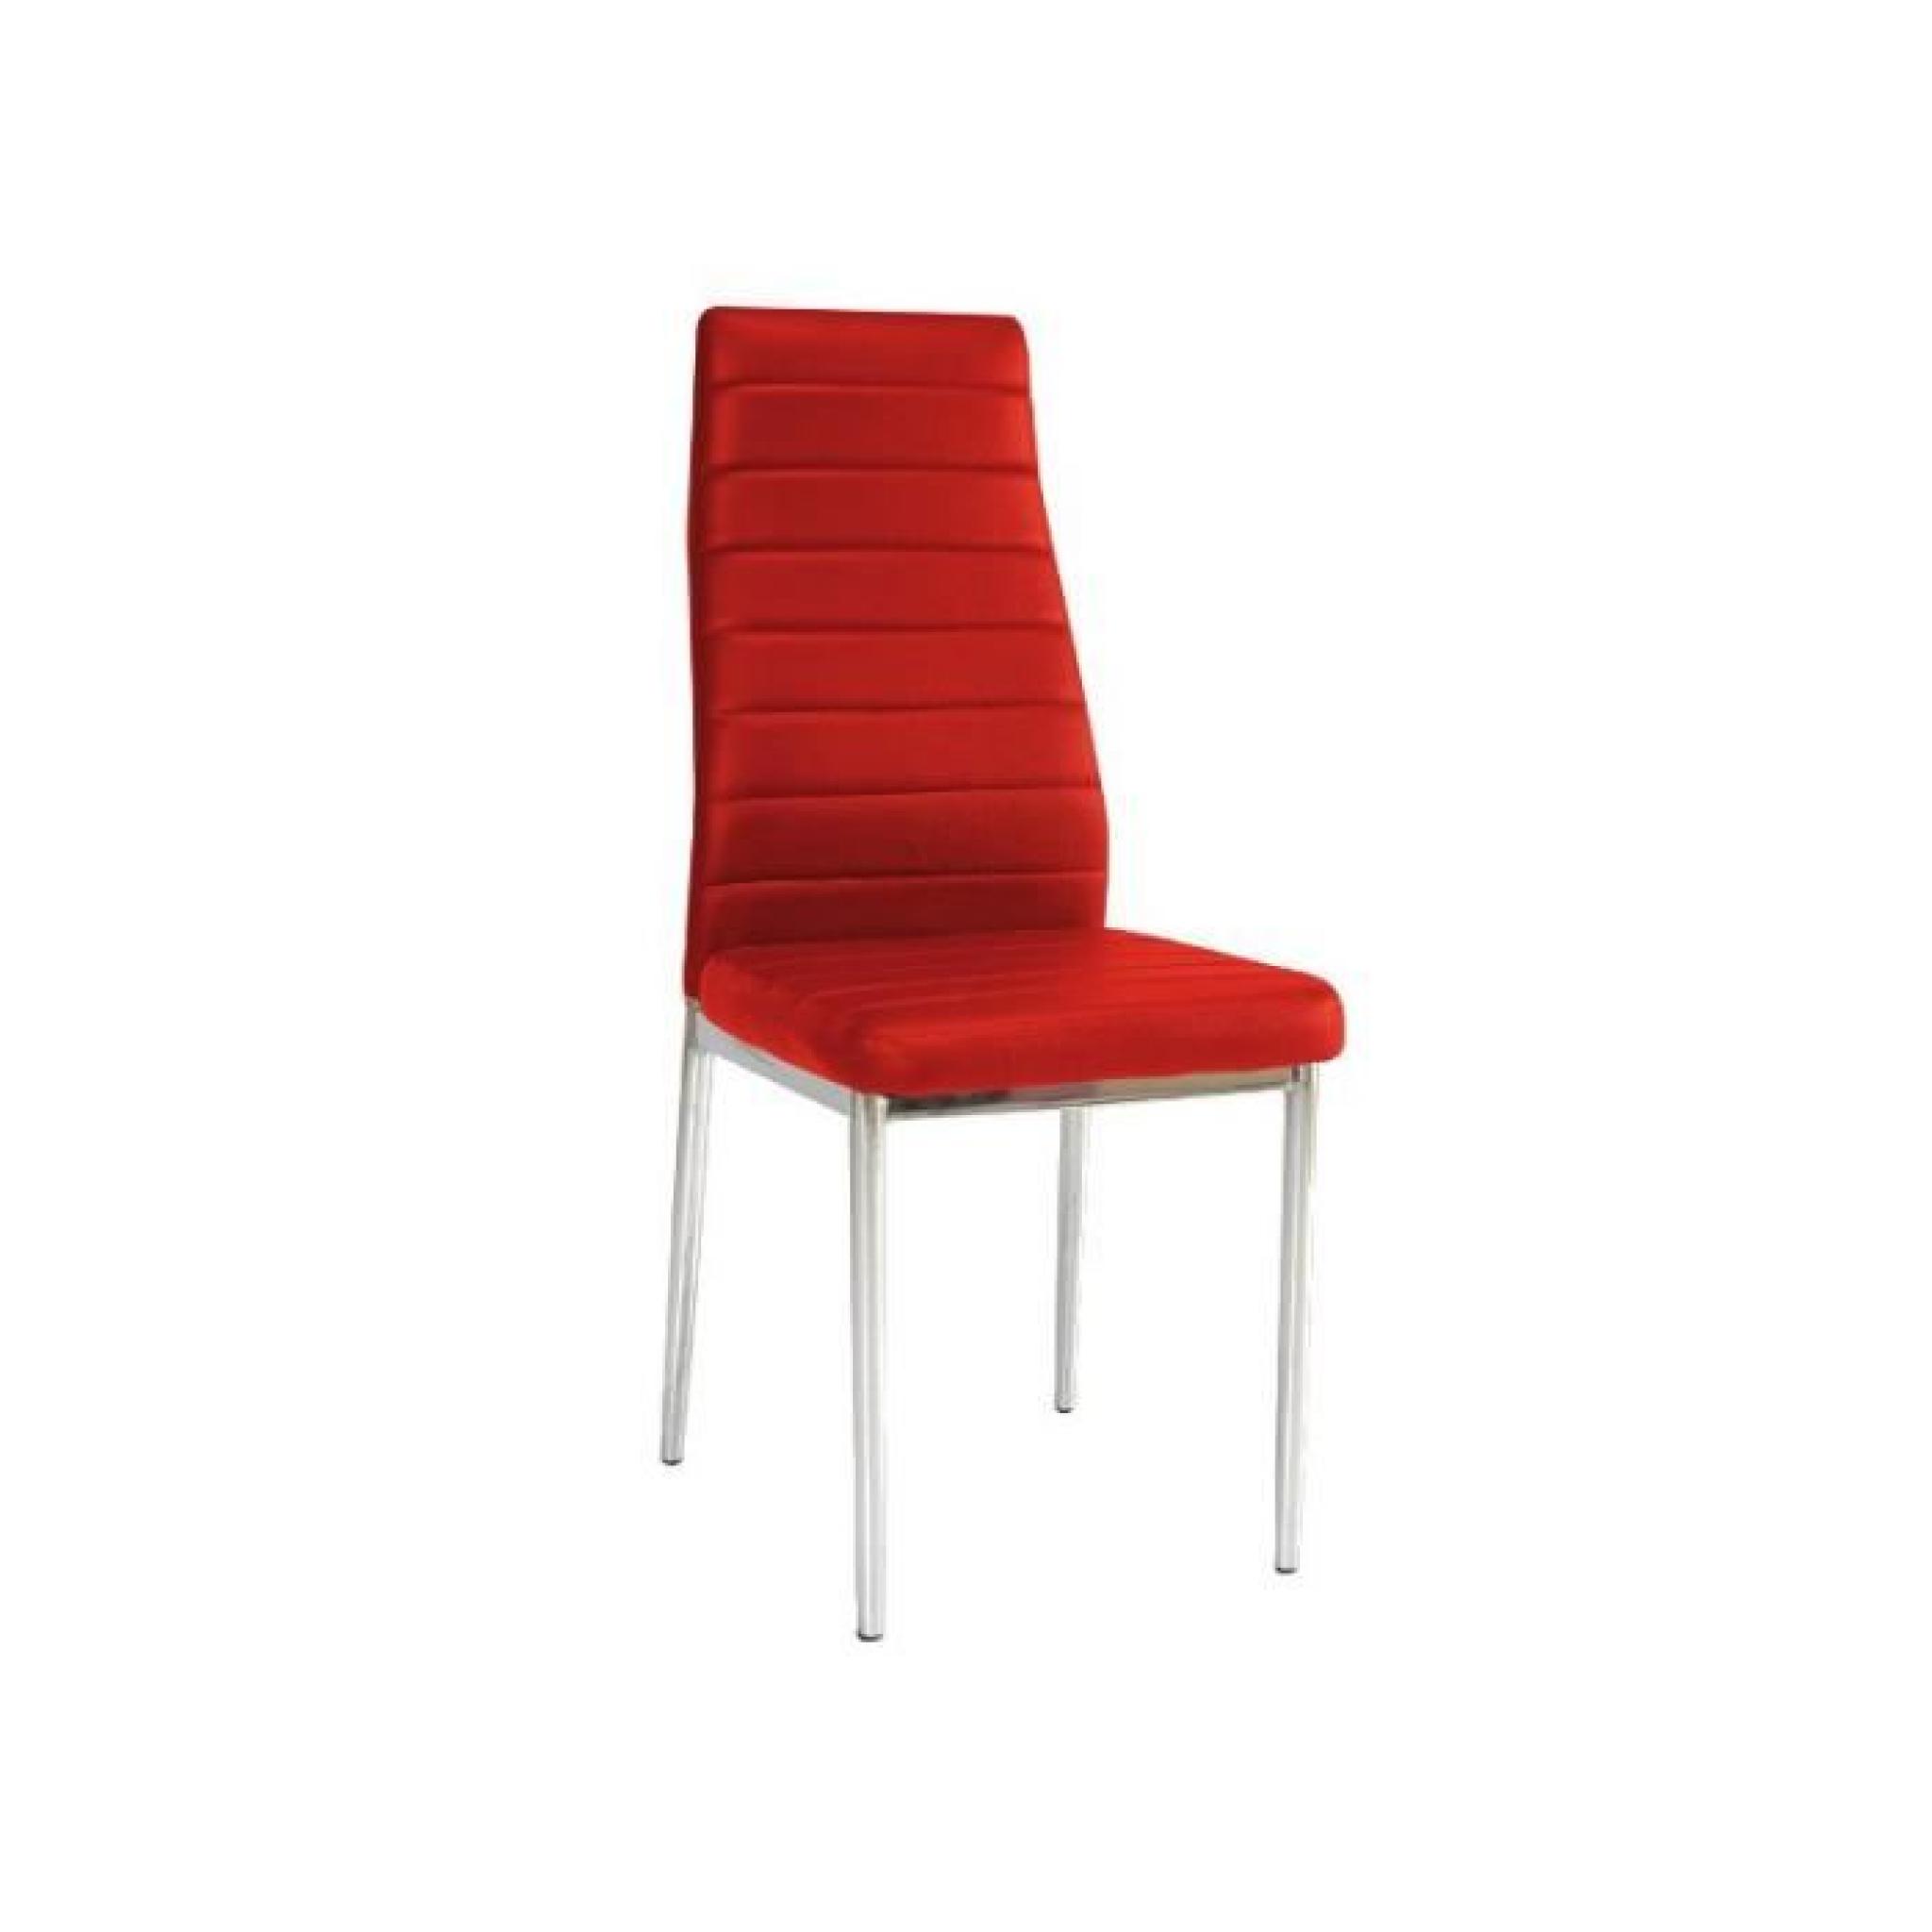 JUSThome H-261 Chaise Rouge 96 x 39 x 38